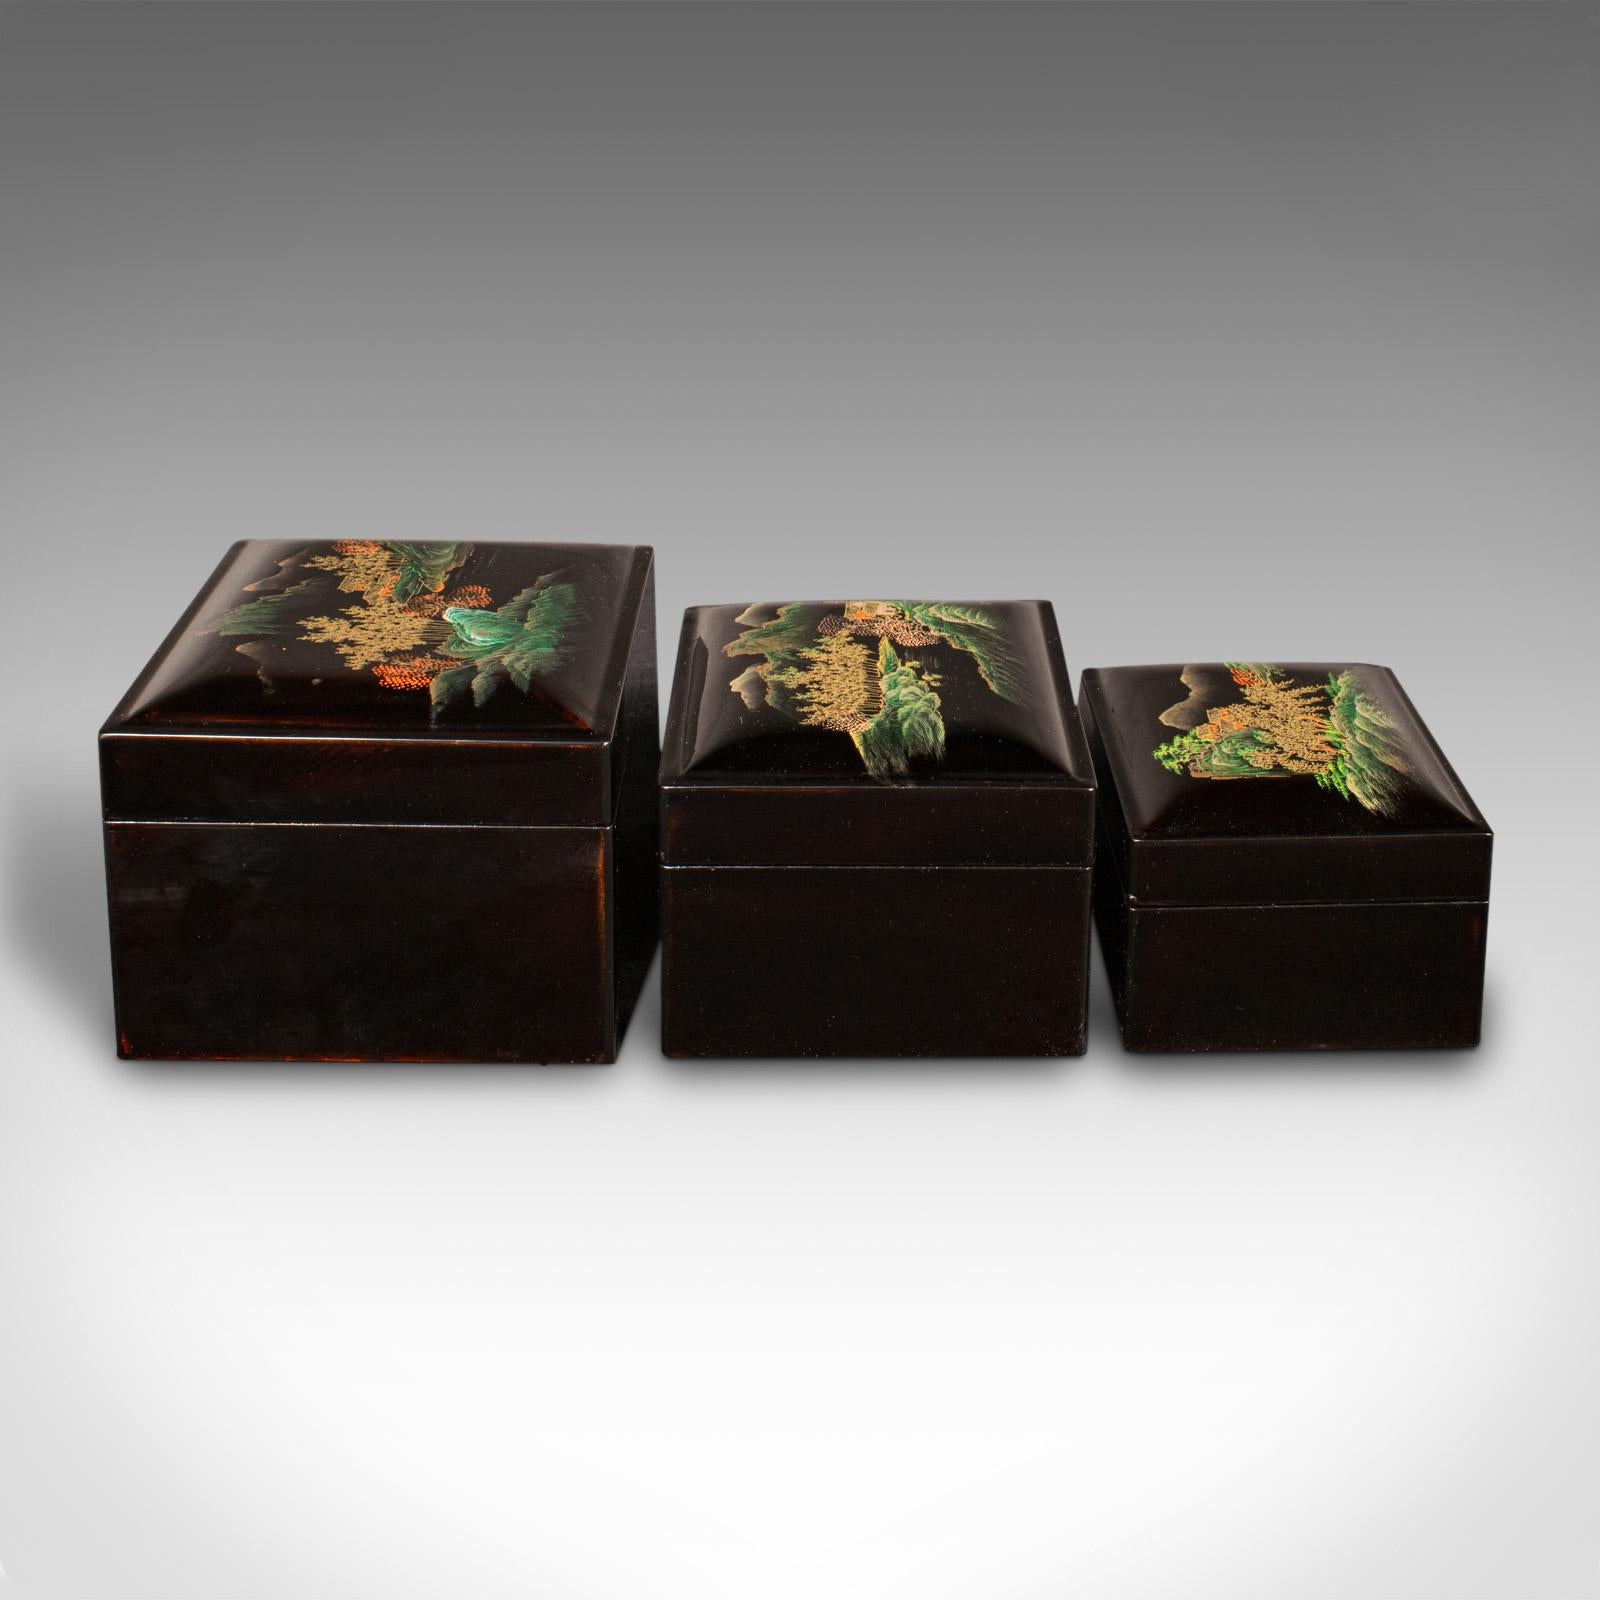 20th Century Trio Of Vintage Nesting Boxes, Japanese, Lacquered, Storage Box, Art Deco, 1940 For Sale